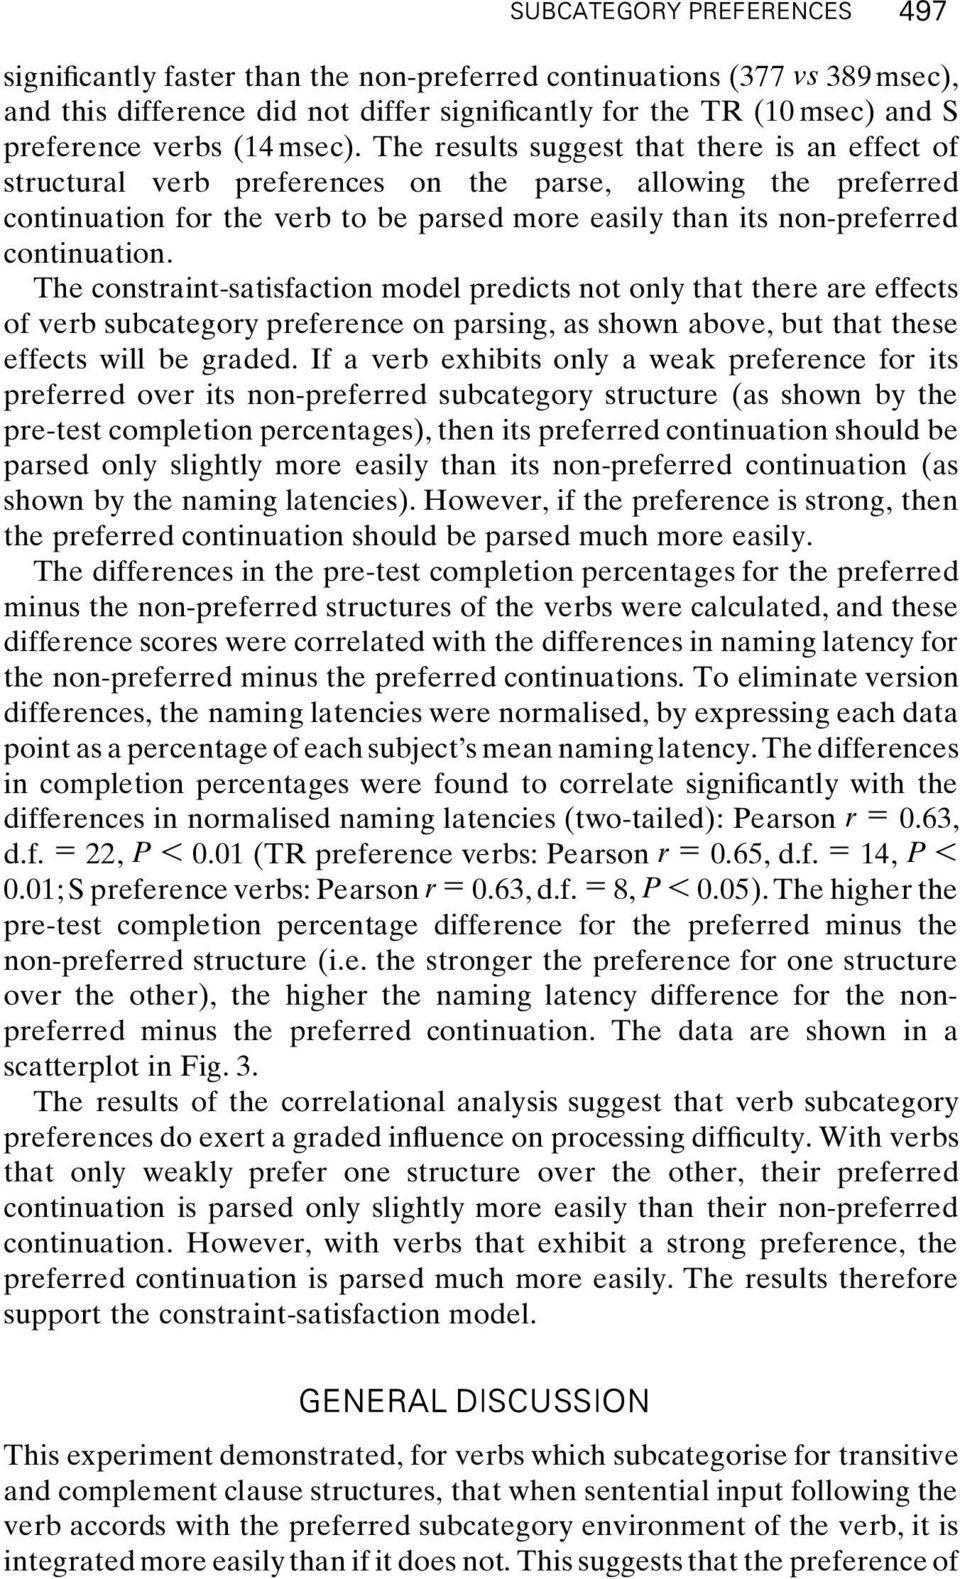 The results suggest that there is an effect of structural verb preferences on the parse, allowing the preferred continuation for the verb to be parsed more easily than its non-preferred continuation.